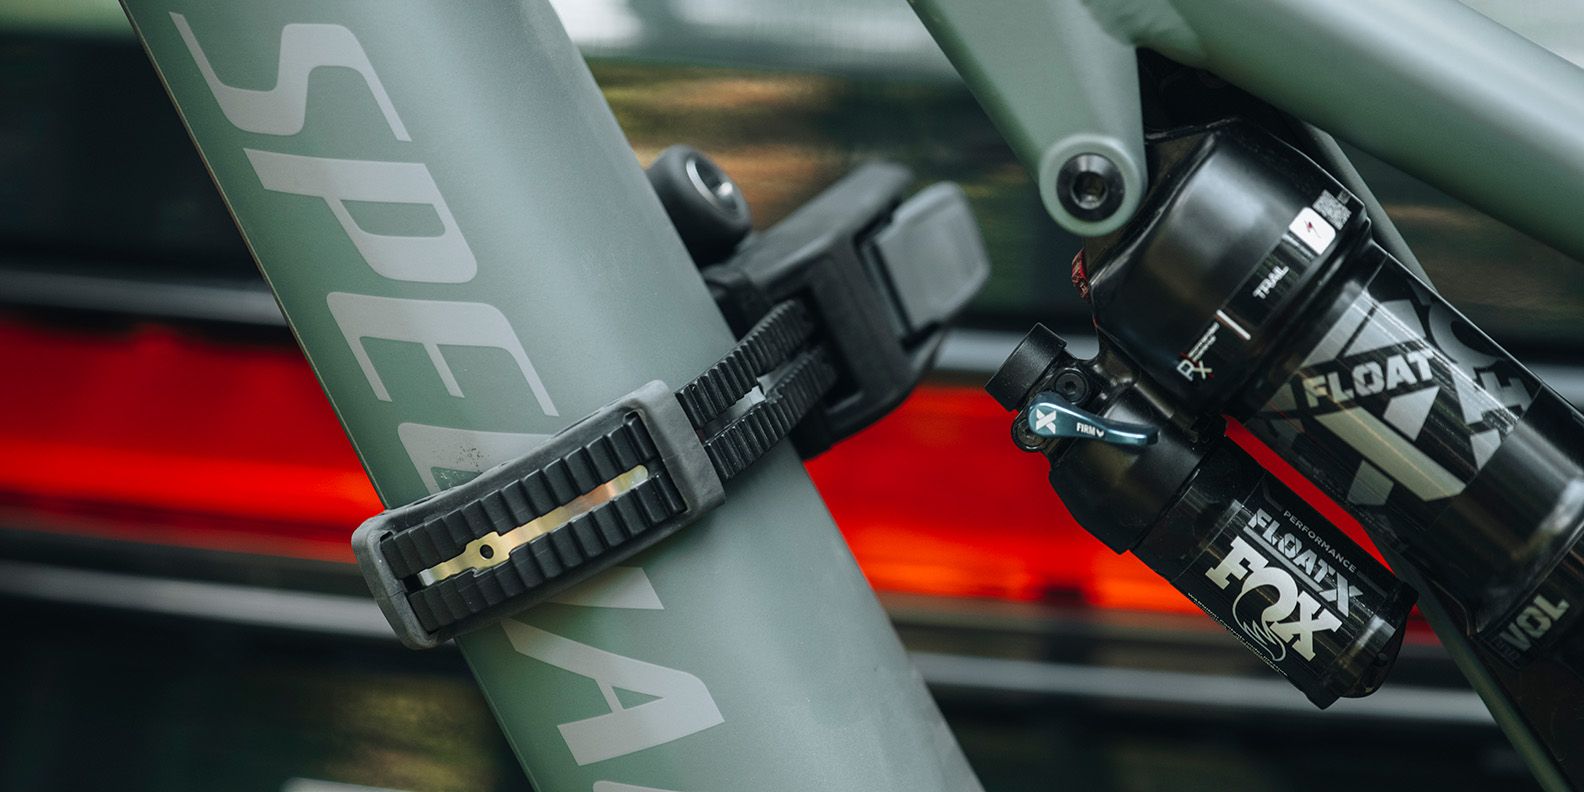 A close up of a strap on the Thule Epos bike rack wrapped around a bike frame